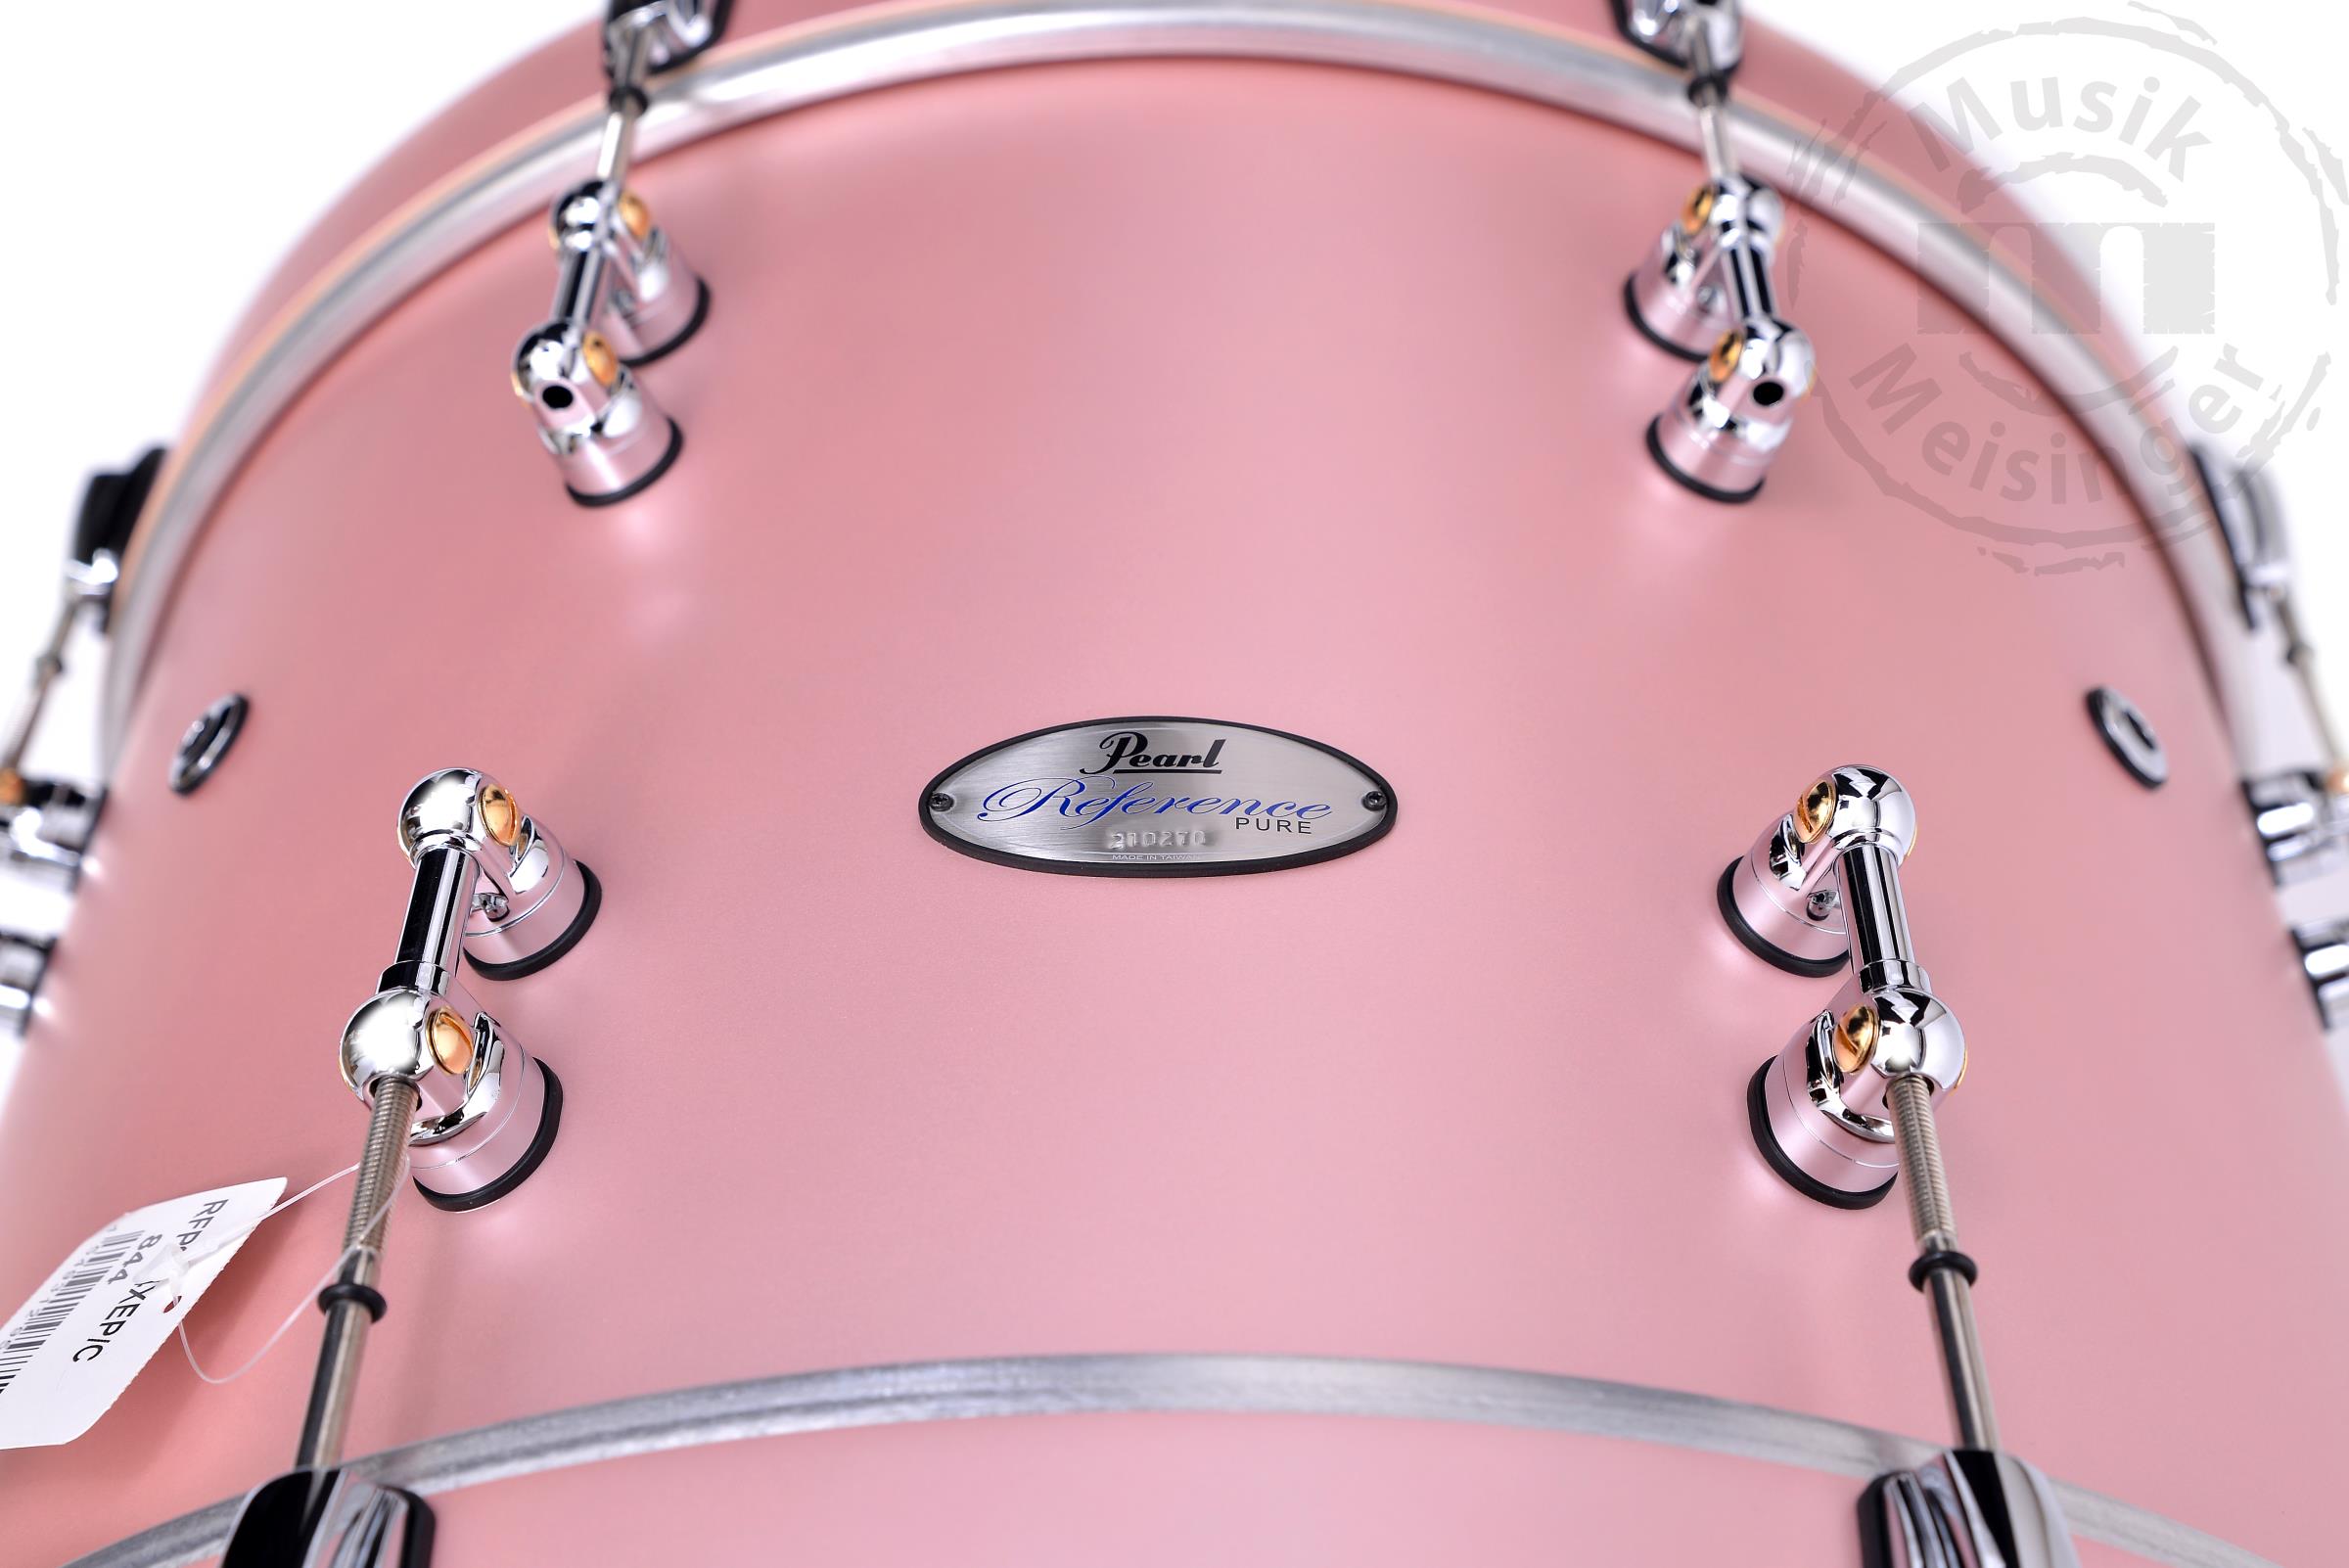 Pearl Reference Pure 20B/10T/12T/14FT Satin Rose Gold